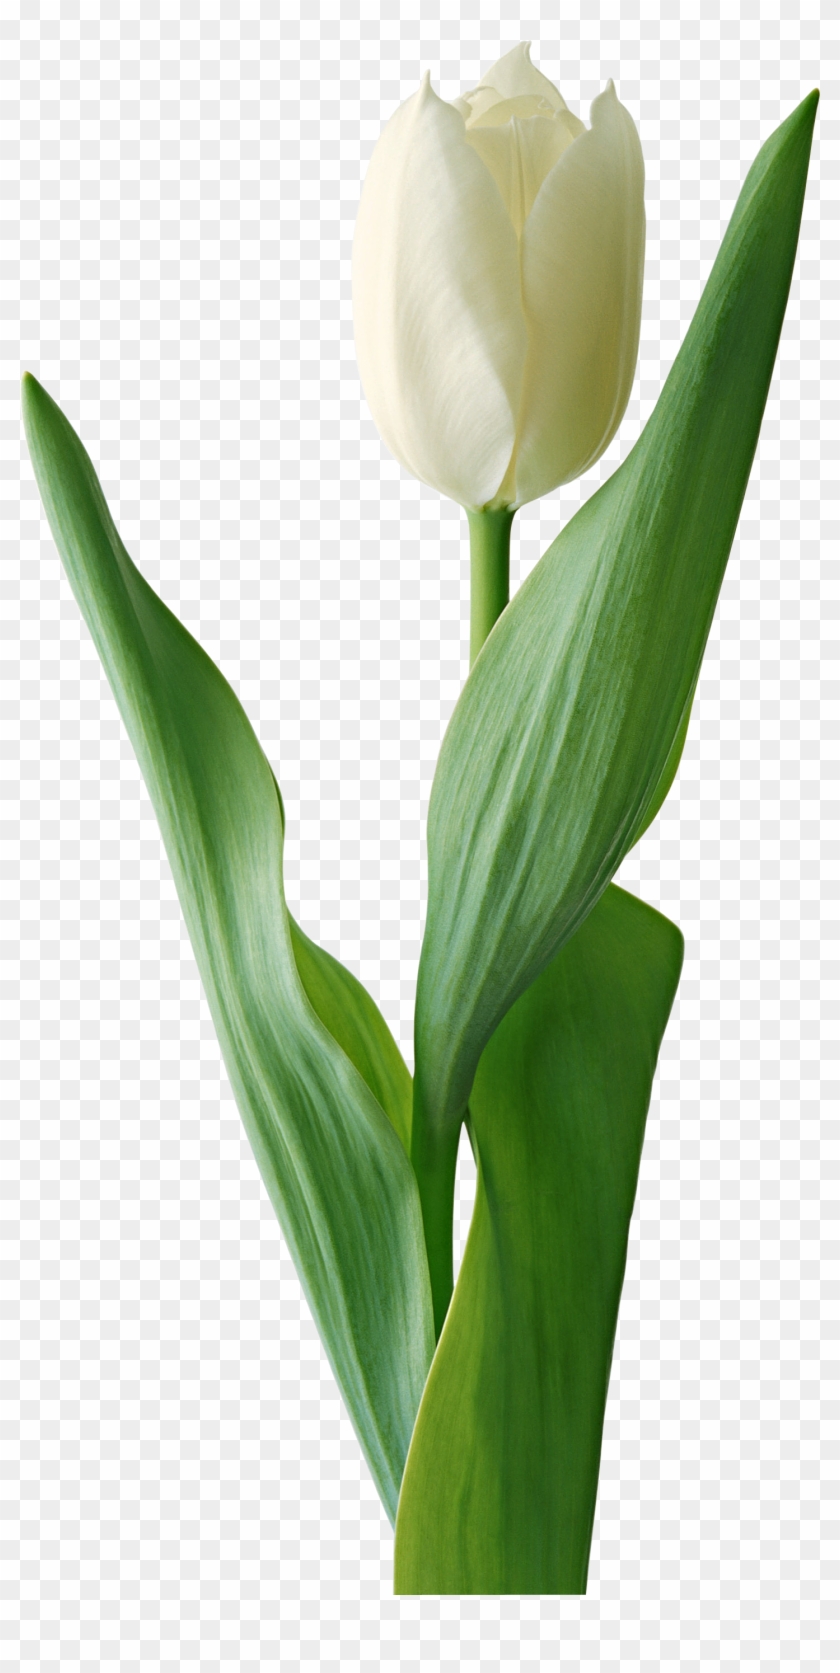 Download - White Tulip Flower Png #310358